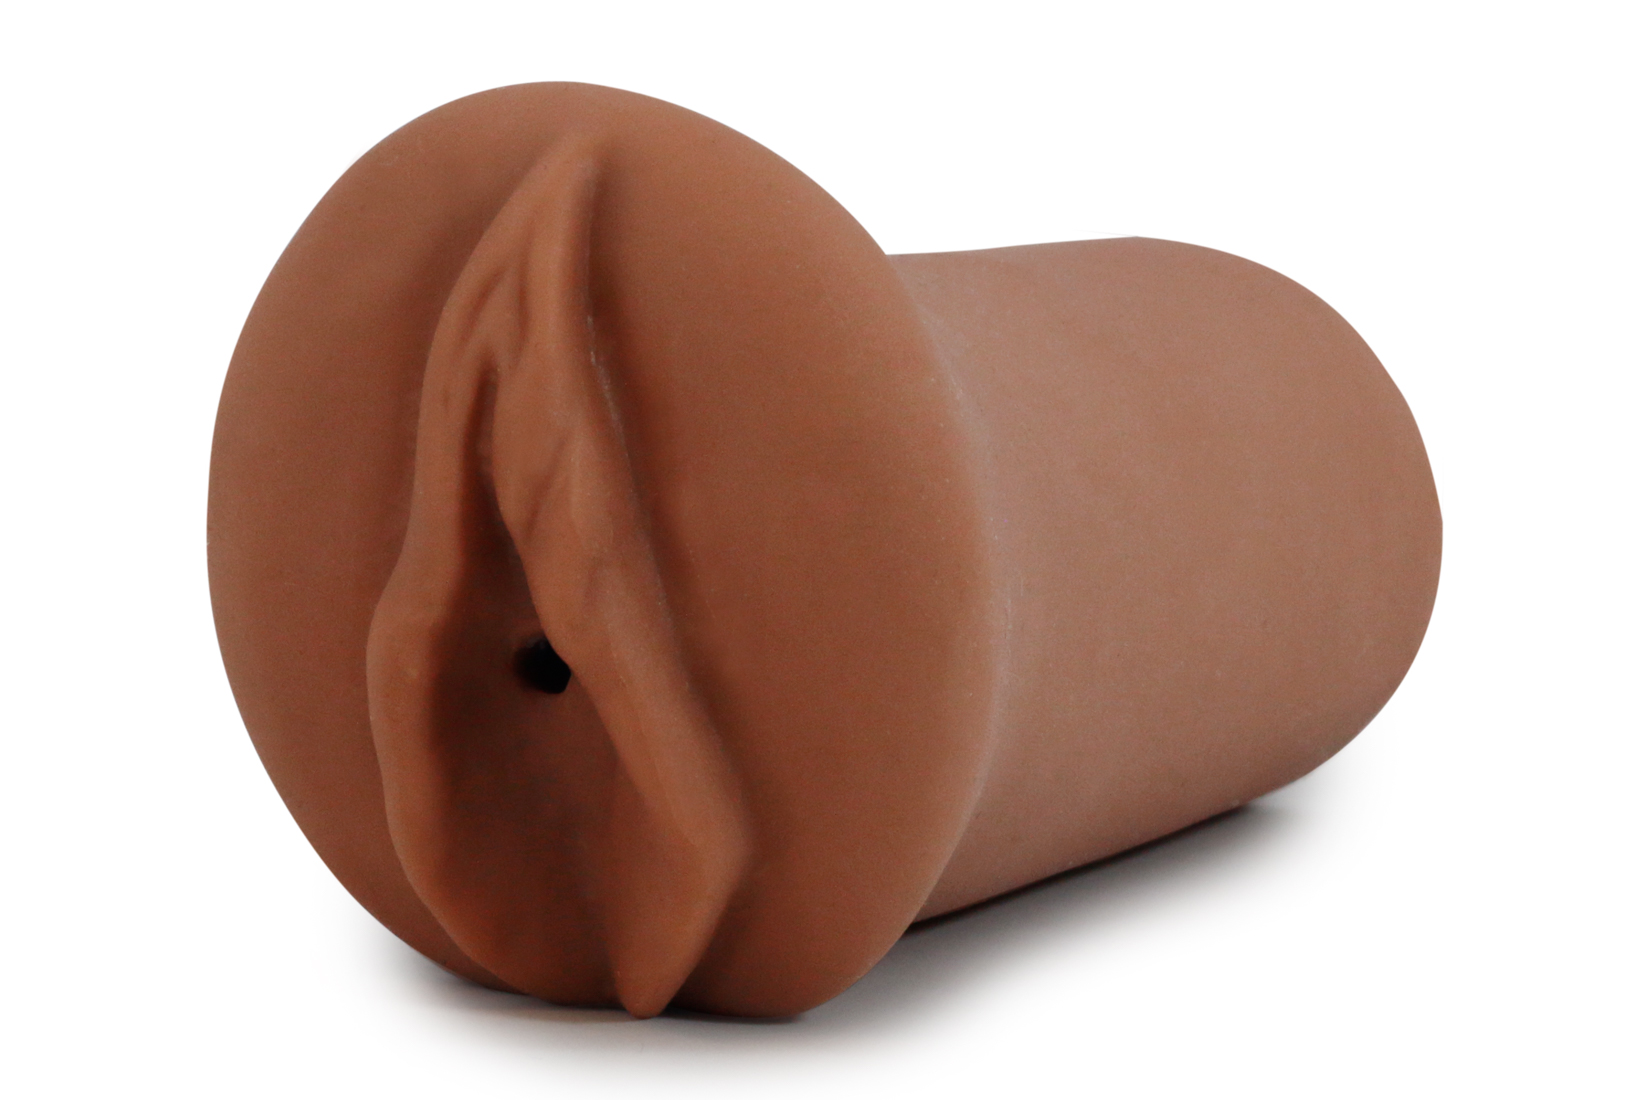 This palm sized representational stroker is shaped to look and feel like a vagina...